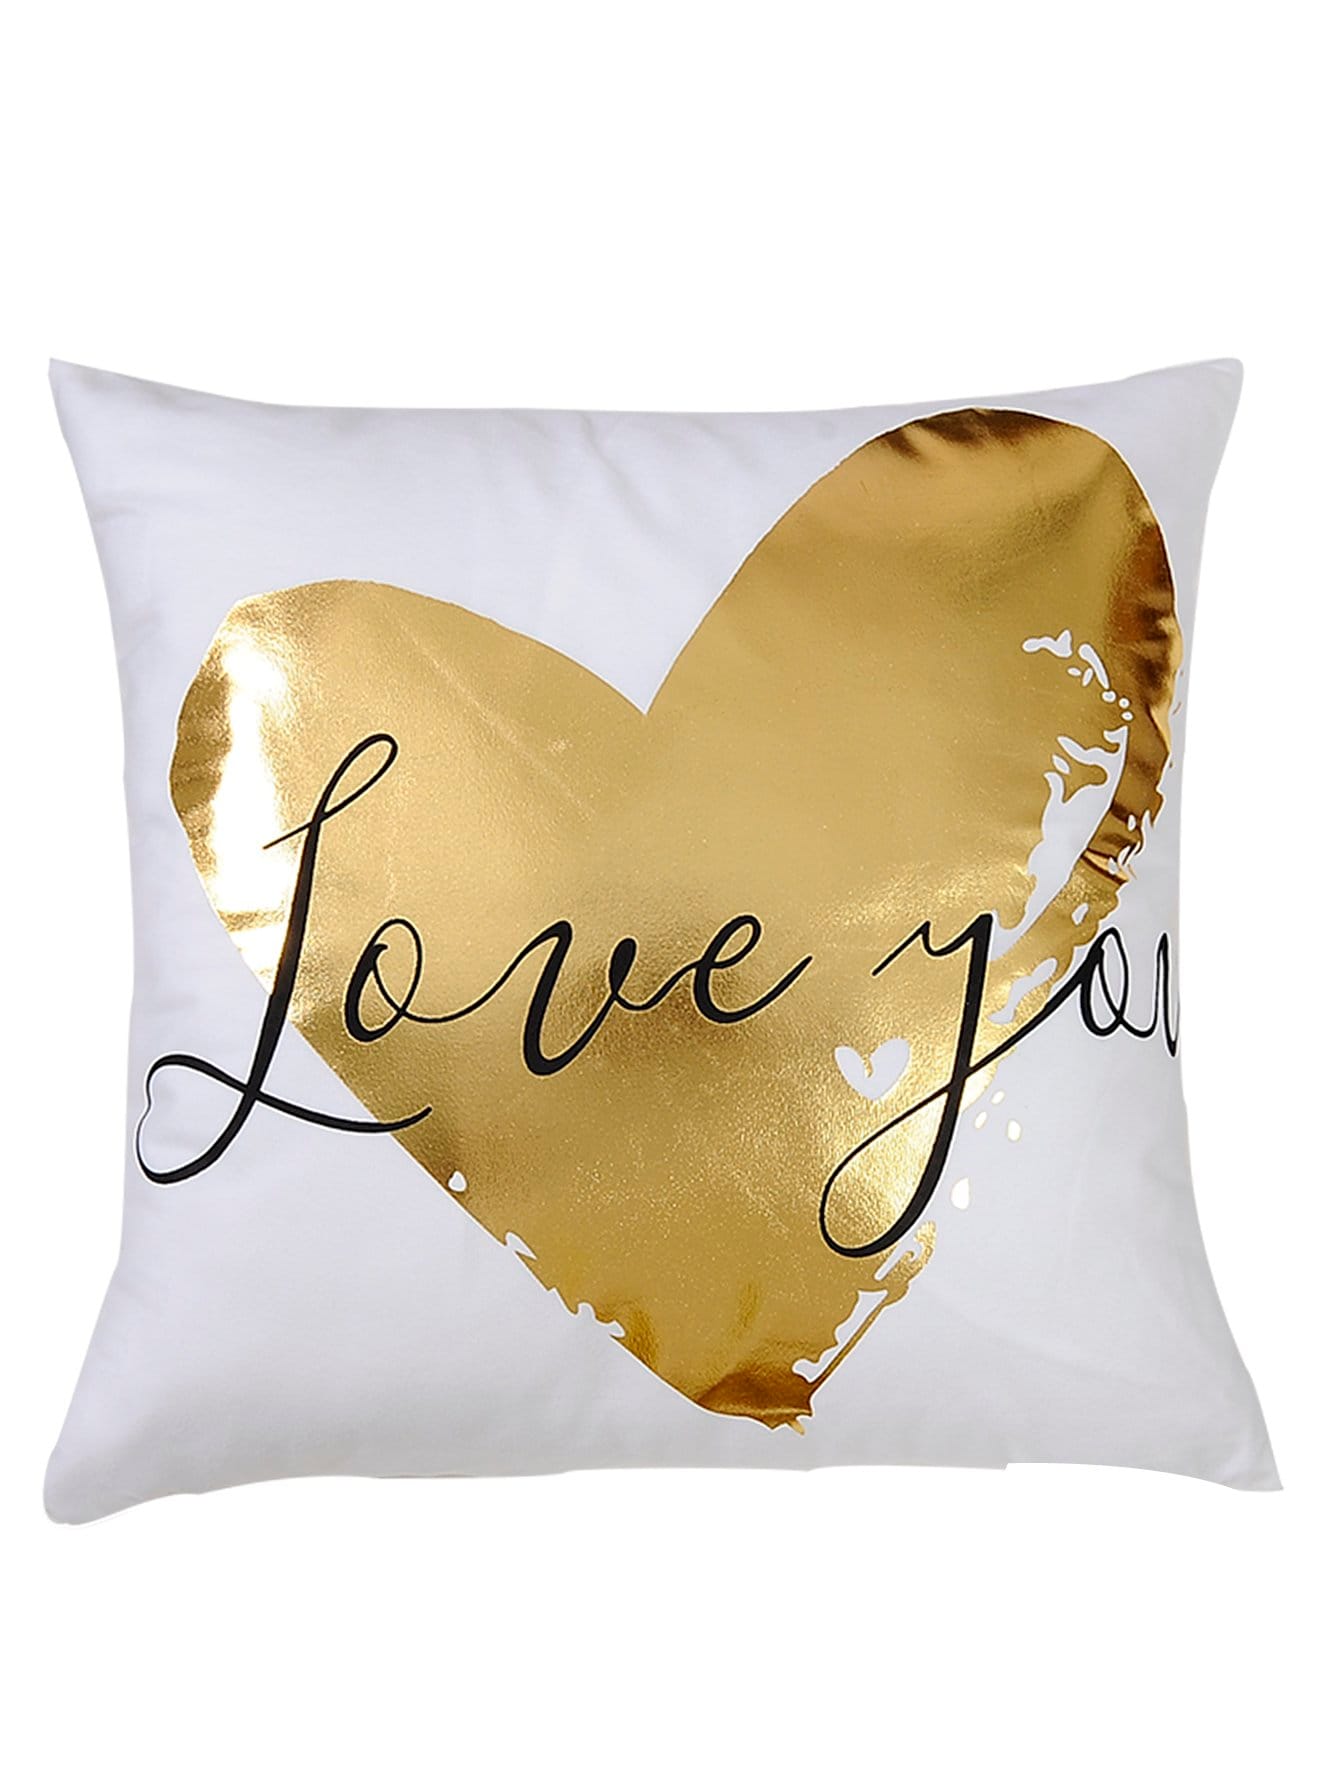 Heart & Letter Cushion Cover